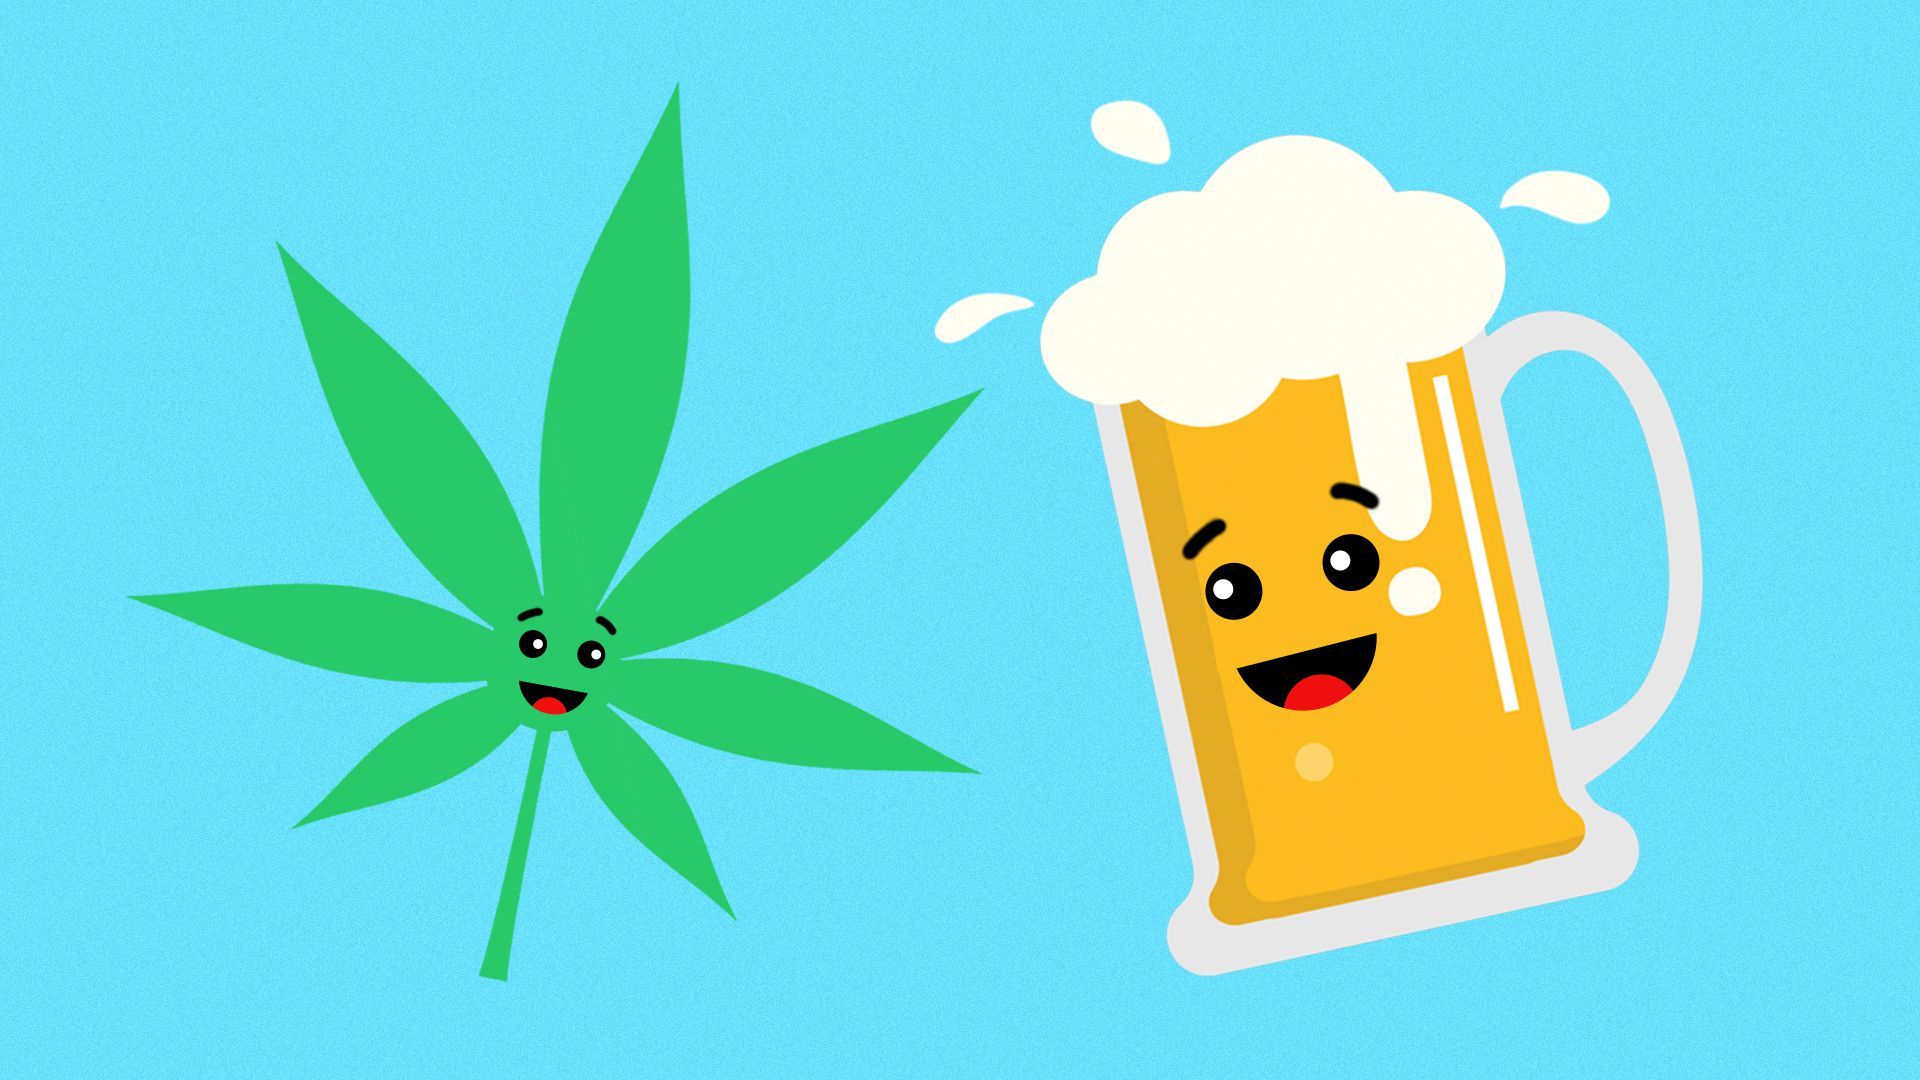 Illustration of cannabis and beer emoji smiling at each other.